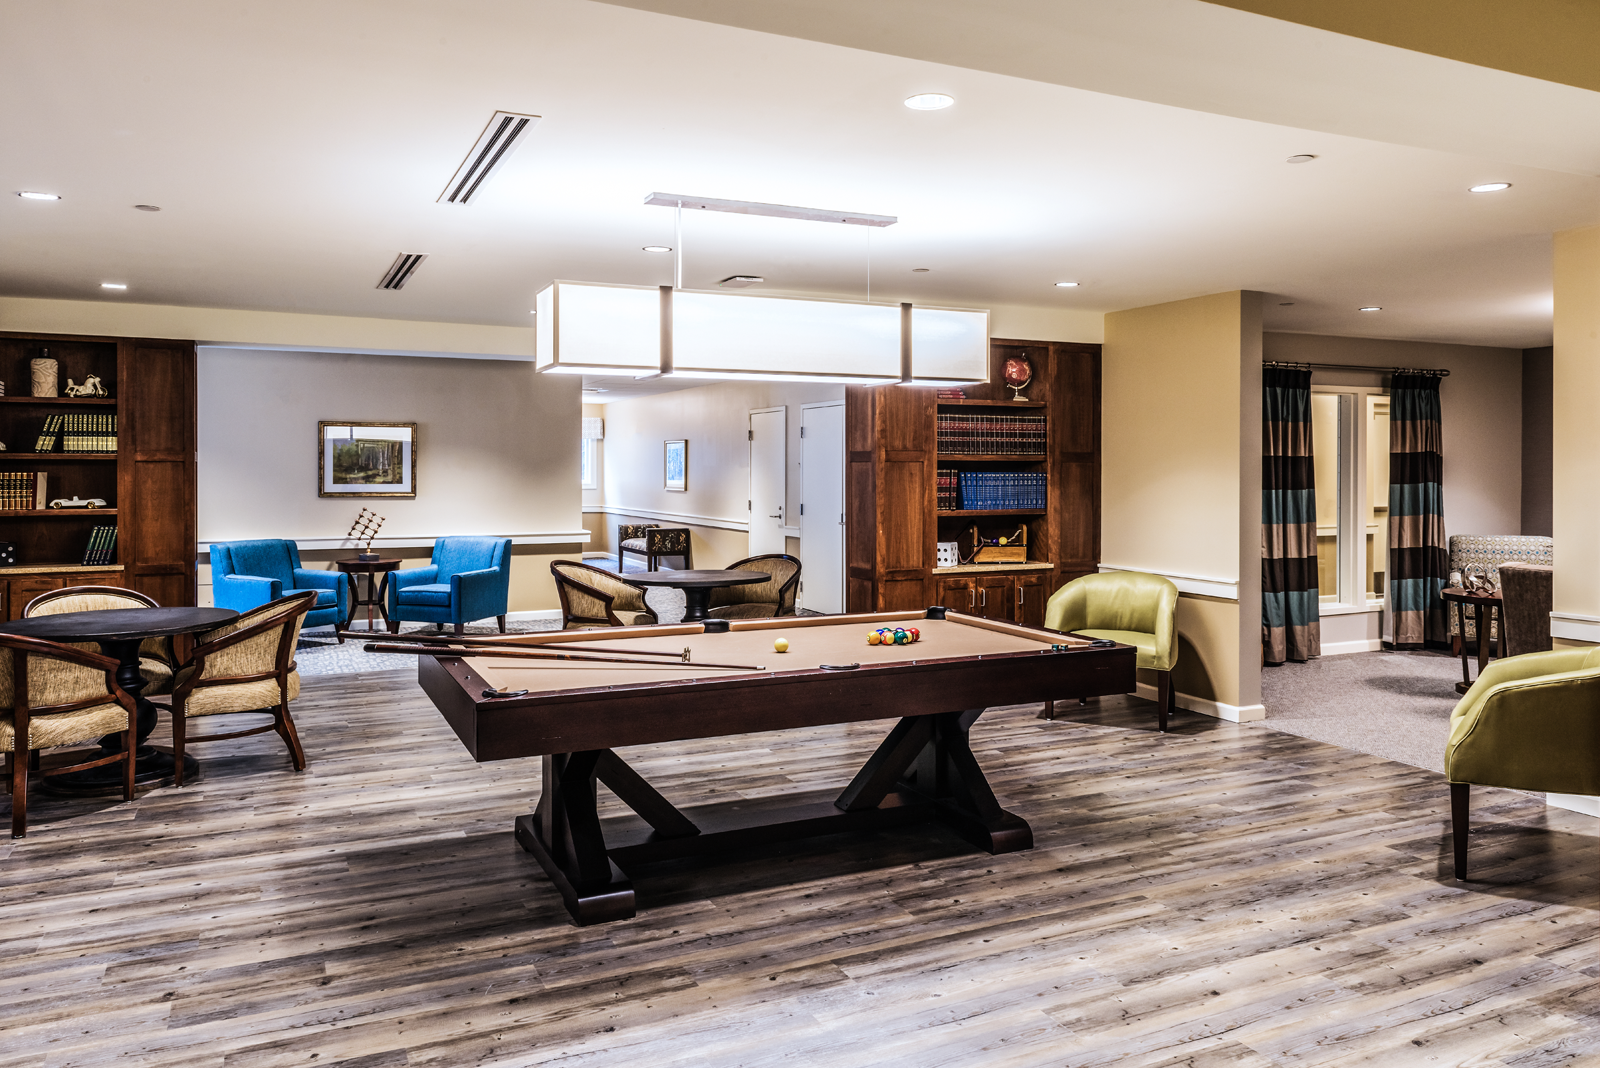 Engaging game room interior design for Massachusetts assisted living community.